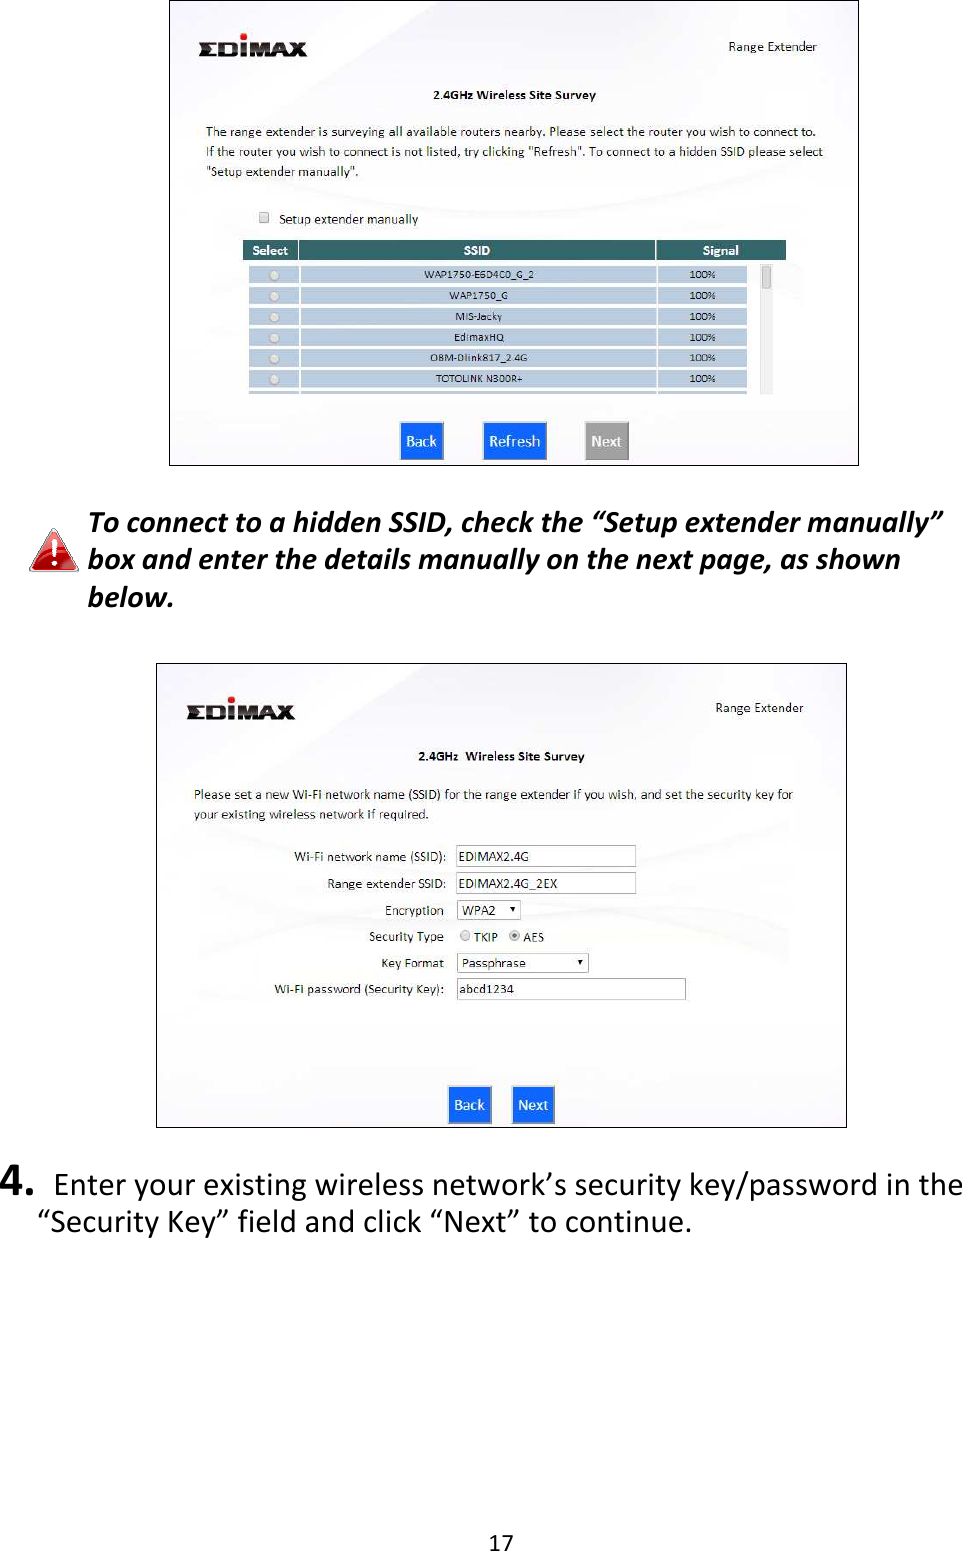 17      To connect to a hidden SSID, check the “Setup extender manually” box and enter the details manually on the next page, as shown below.    4.   Enter your existing wireless network’s security key/password in the “Security Key” field and click “Next” to continue.  